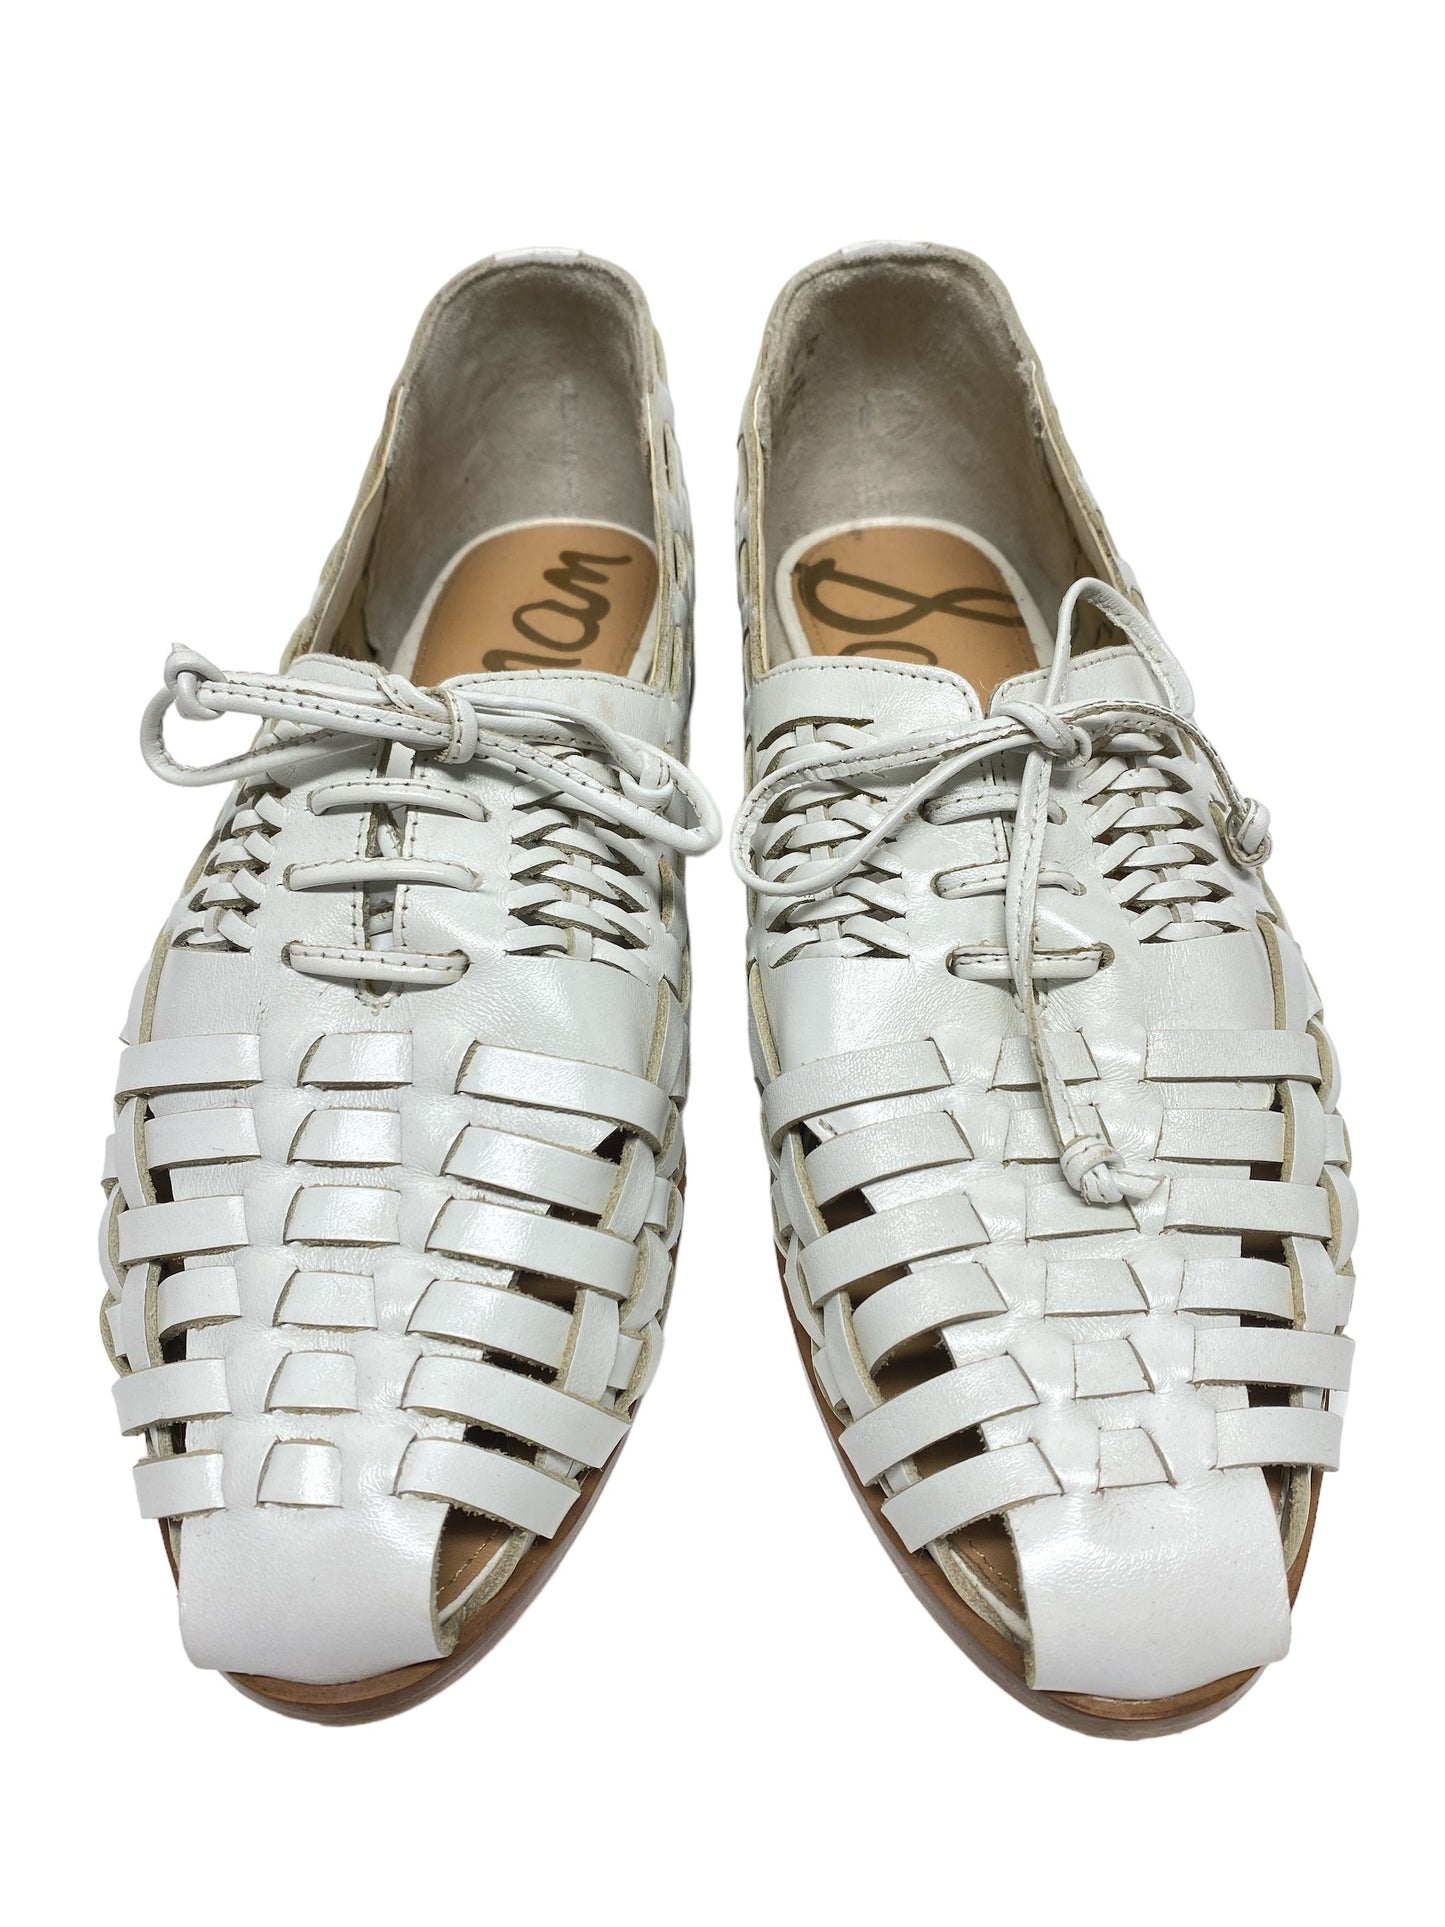 Shoes Flats Loafer Oxford By Sam Edelman  Size: 9